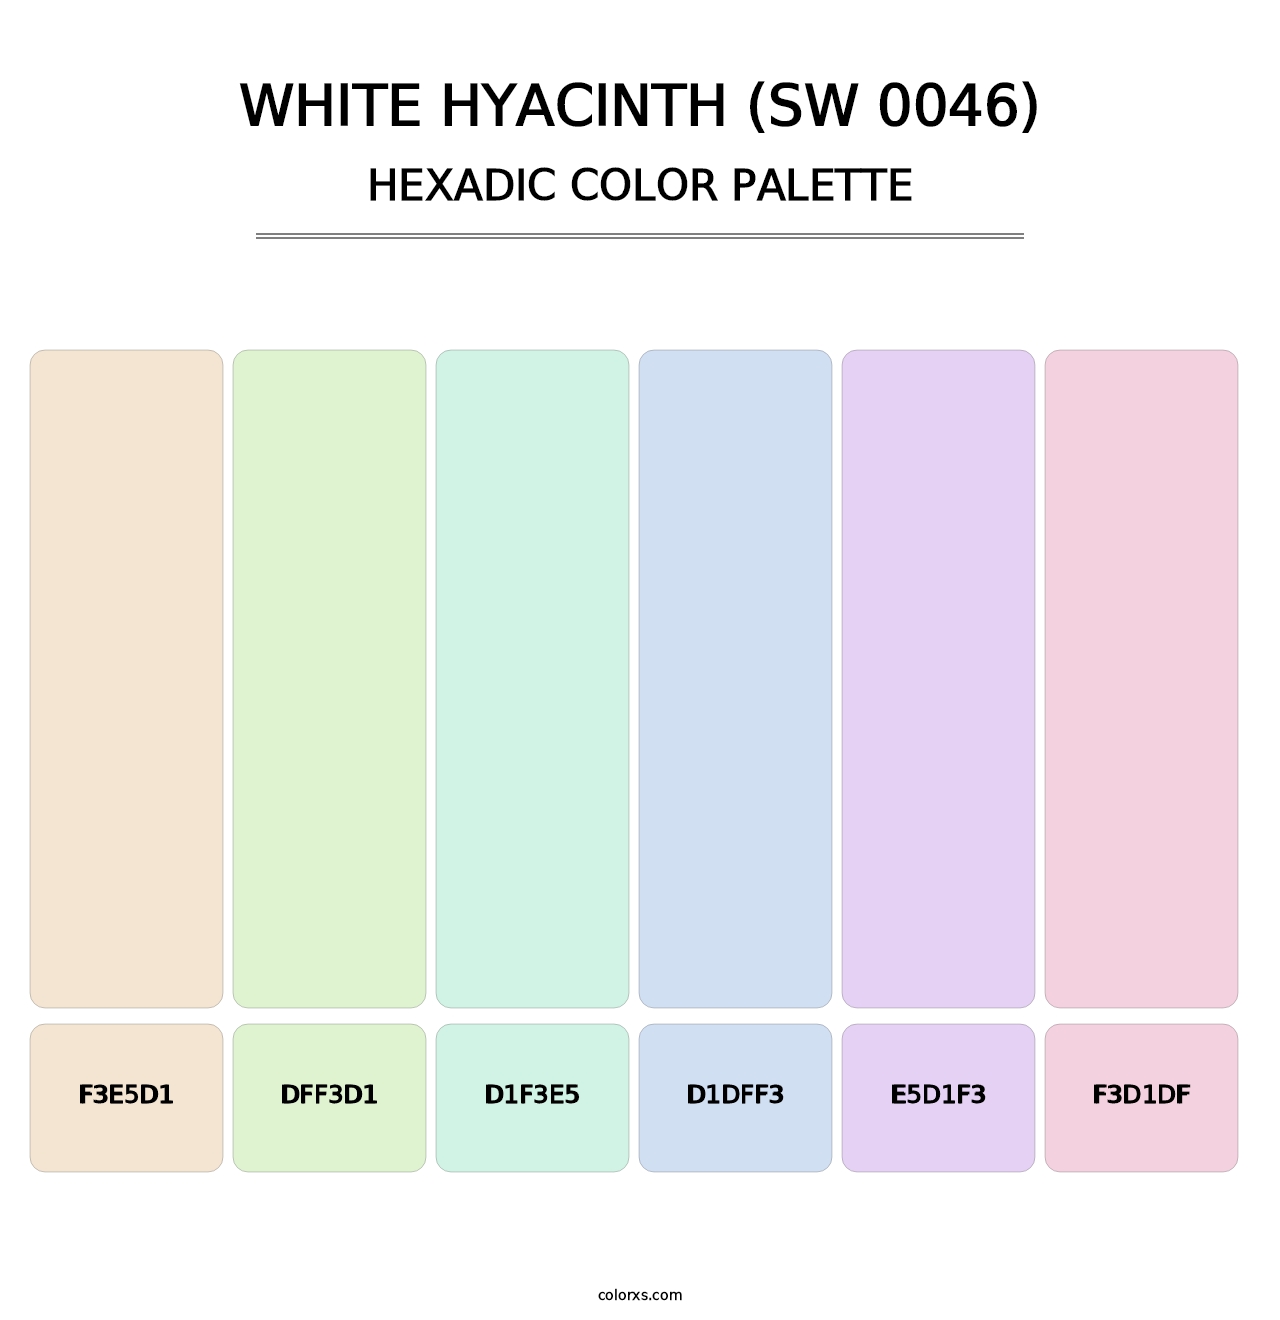 White Hyacinth (SW 0046) - Hexadic Color Palette